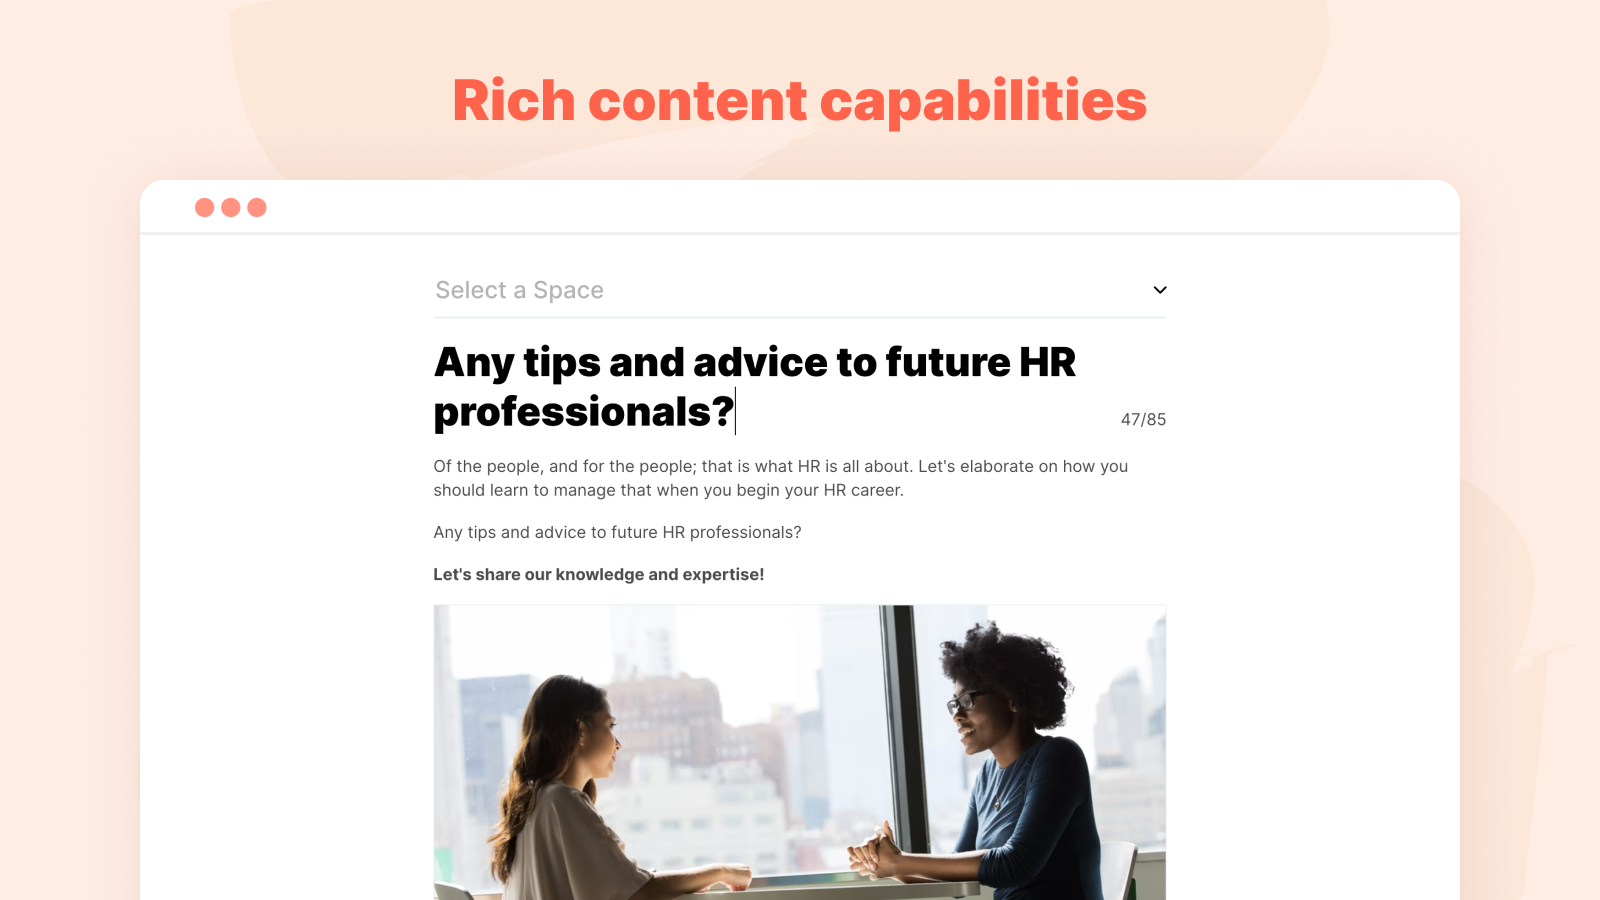 Rich content capabilities. Enable members to create long-form articles, post questions, suggestions and detailed comments.